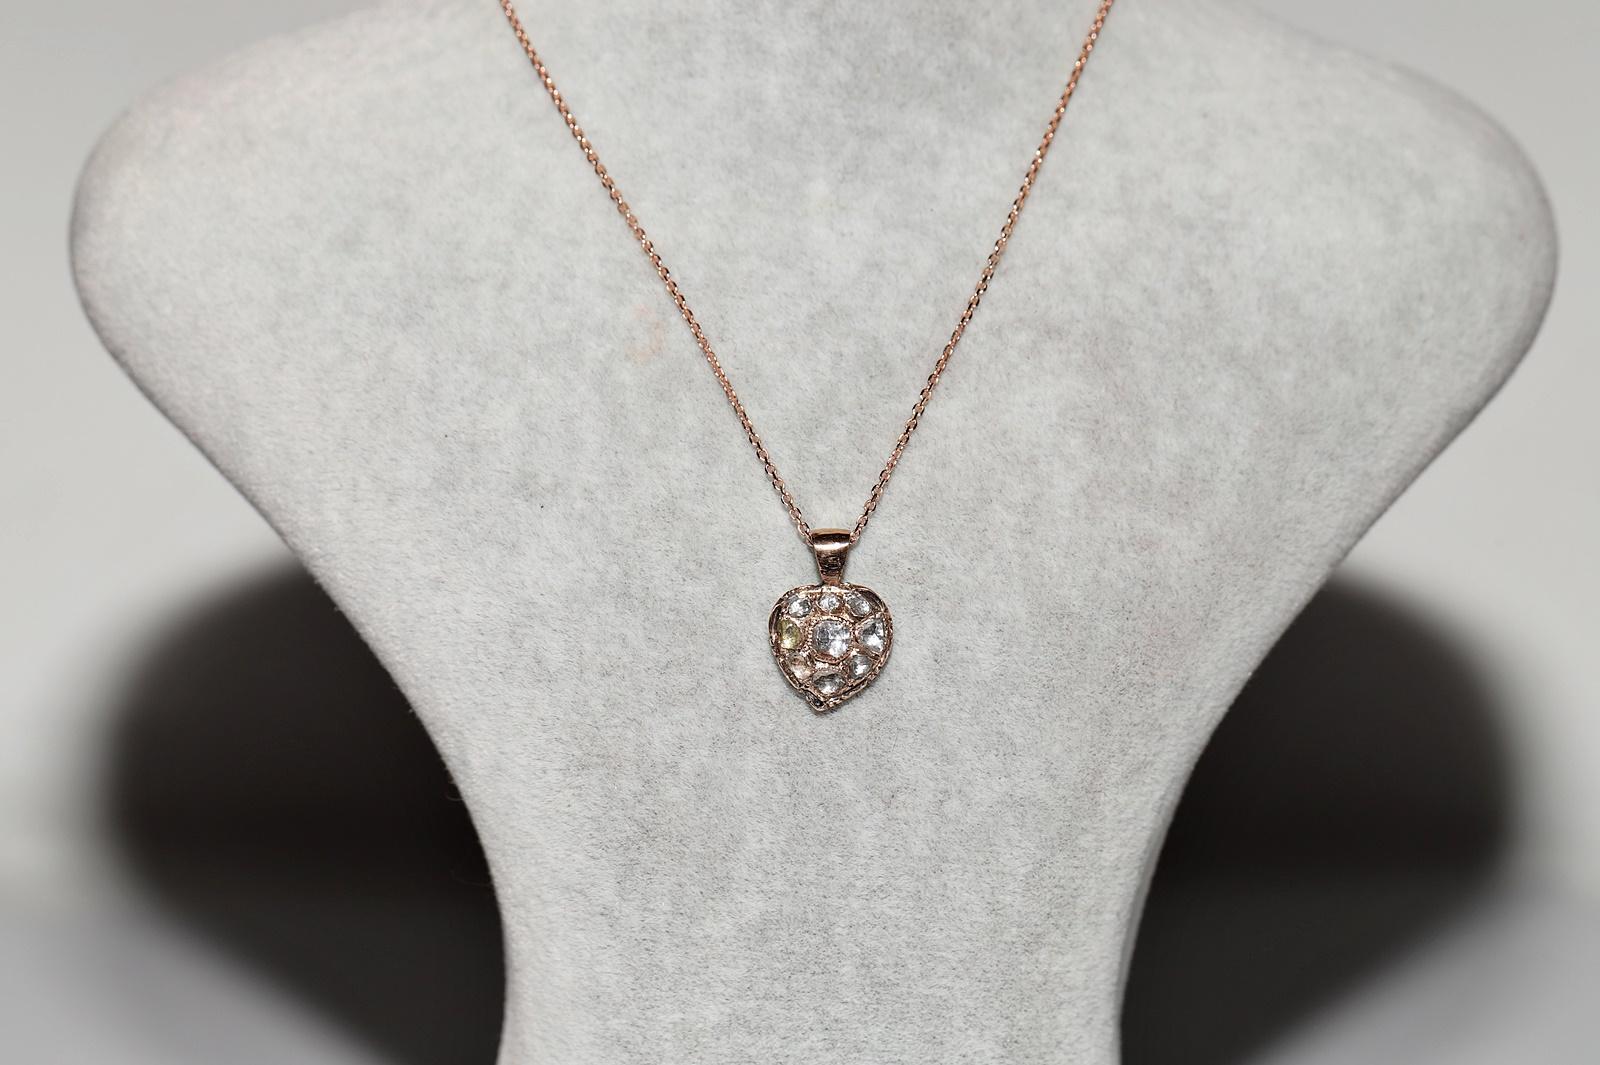 In very good condition.
Total weight is 3.3 grams.
Totally is diamond 0.50 ct.
The diamond is has H-I-J-K-L-M-Brown Color and s1-s2-s3-Pique 1-2.
Totally is chain 45 cm.
Please contact for any questions.